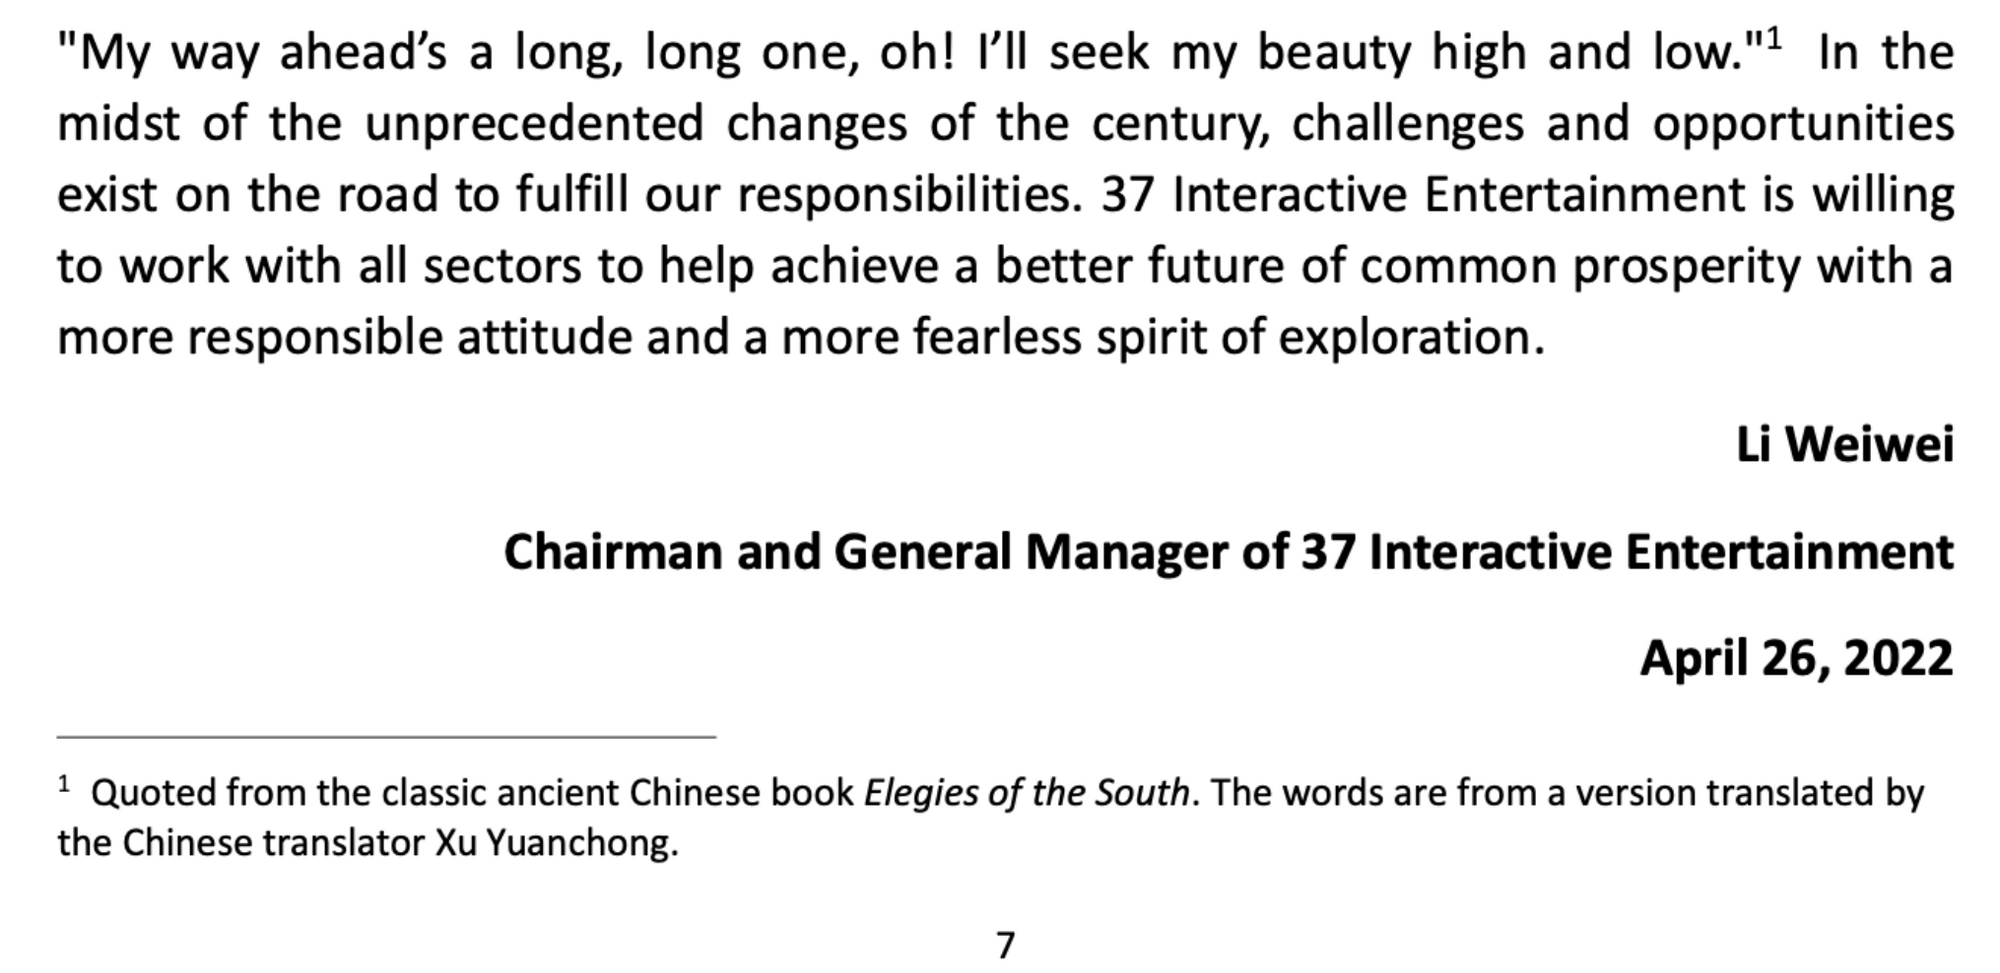 A screenshot of the ESG document, where Chairman Li Weiwei quotes from Elegies of the South.